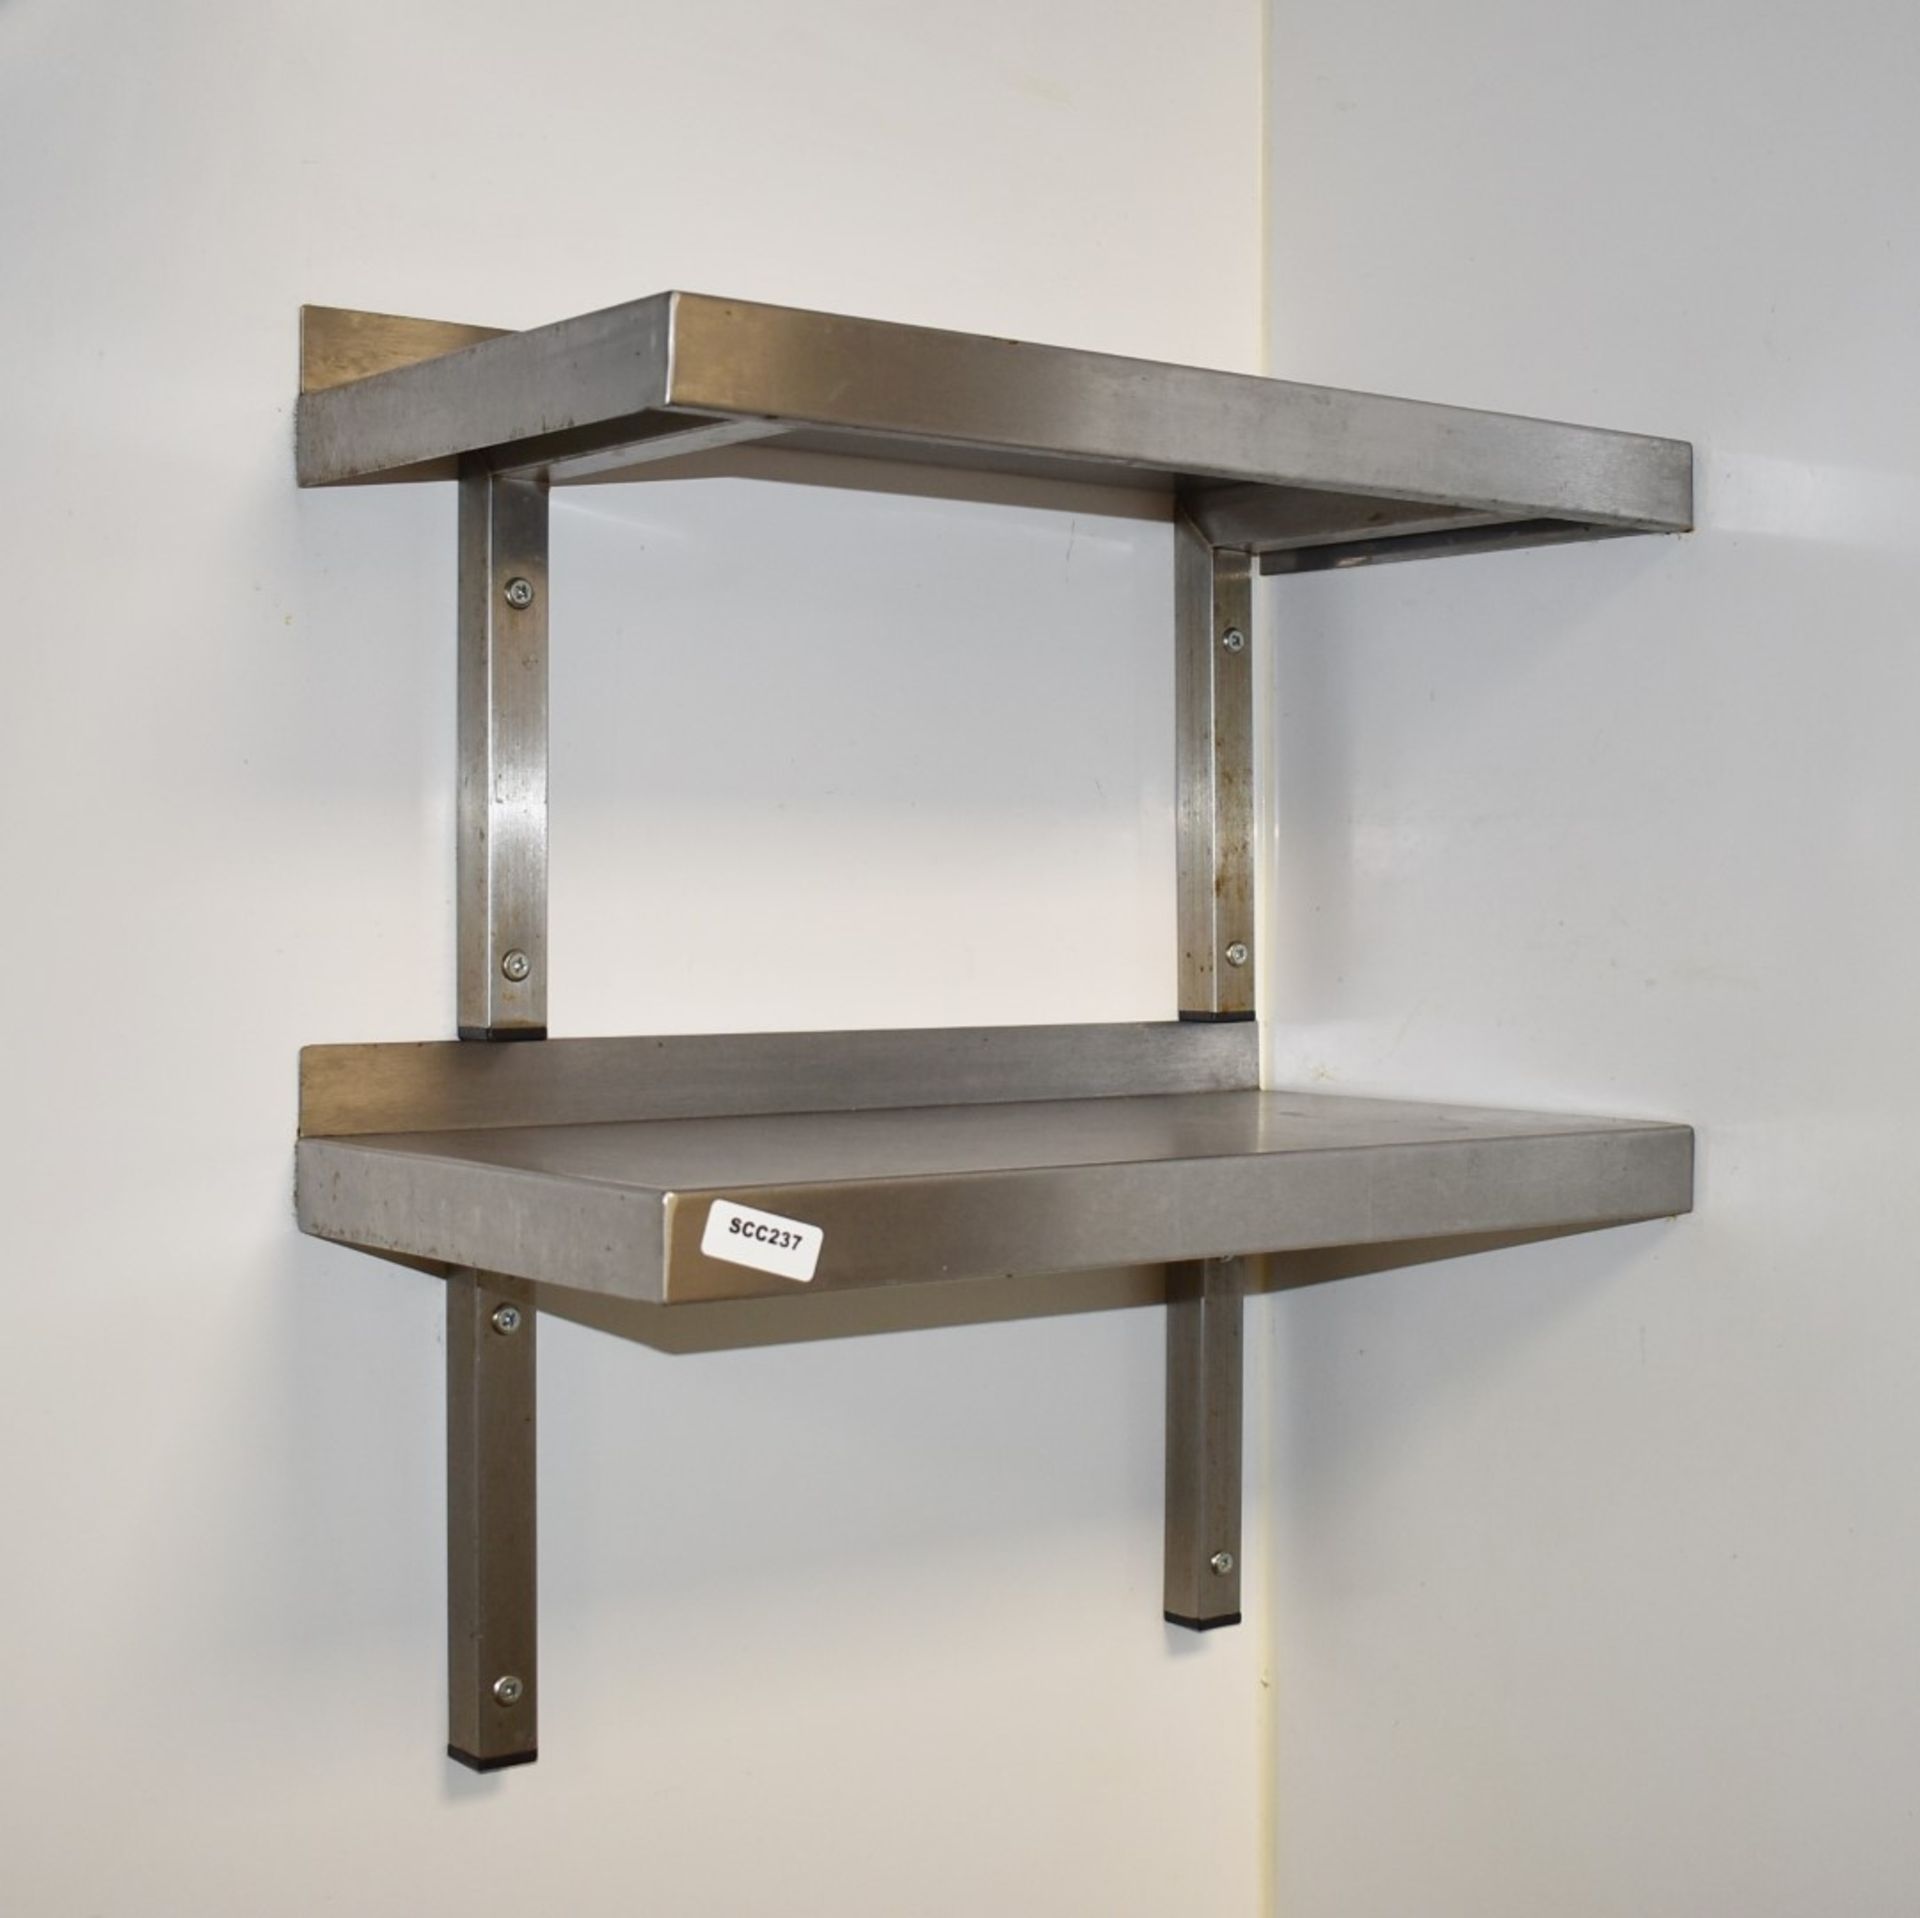 6 x Stainless Steel Wall Mounted Shelves With Mounting Brackets - Sizes W57/W104/W156 cms 2 of Each - Image 3 of 5